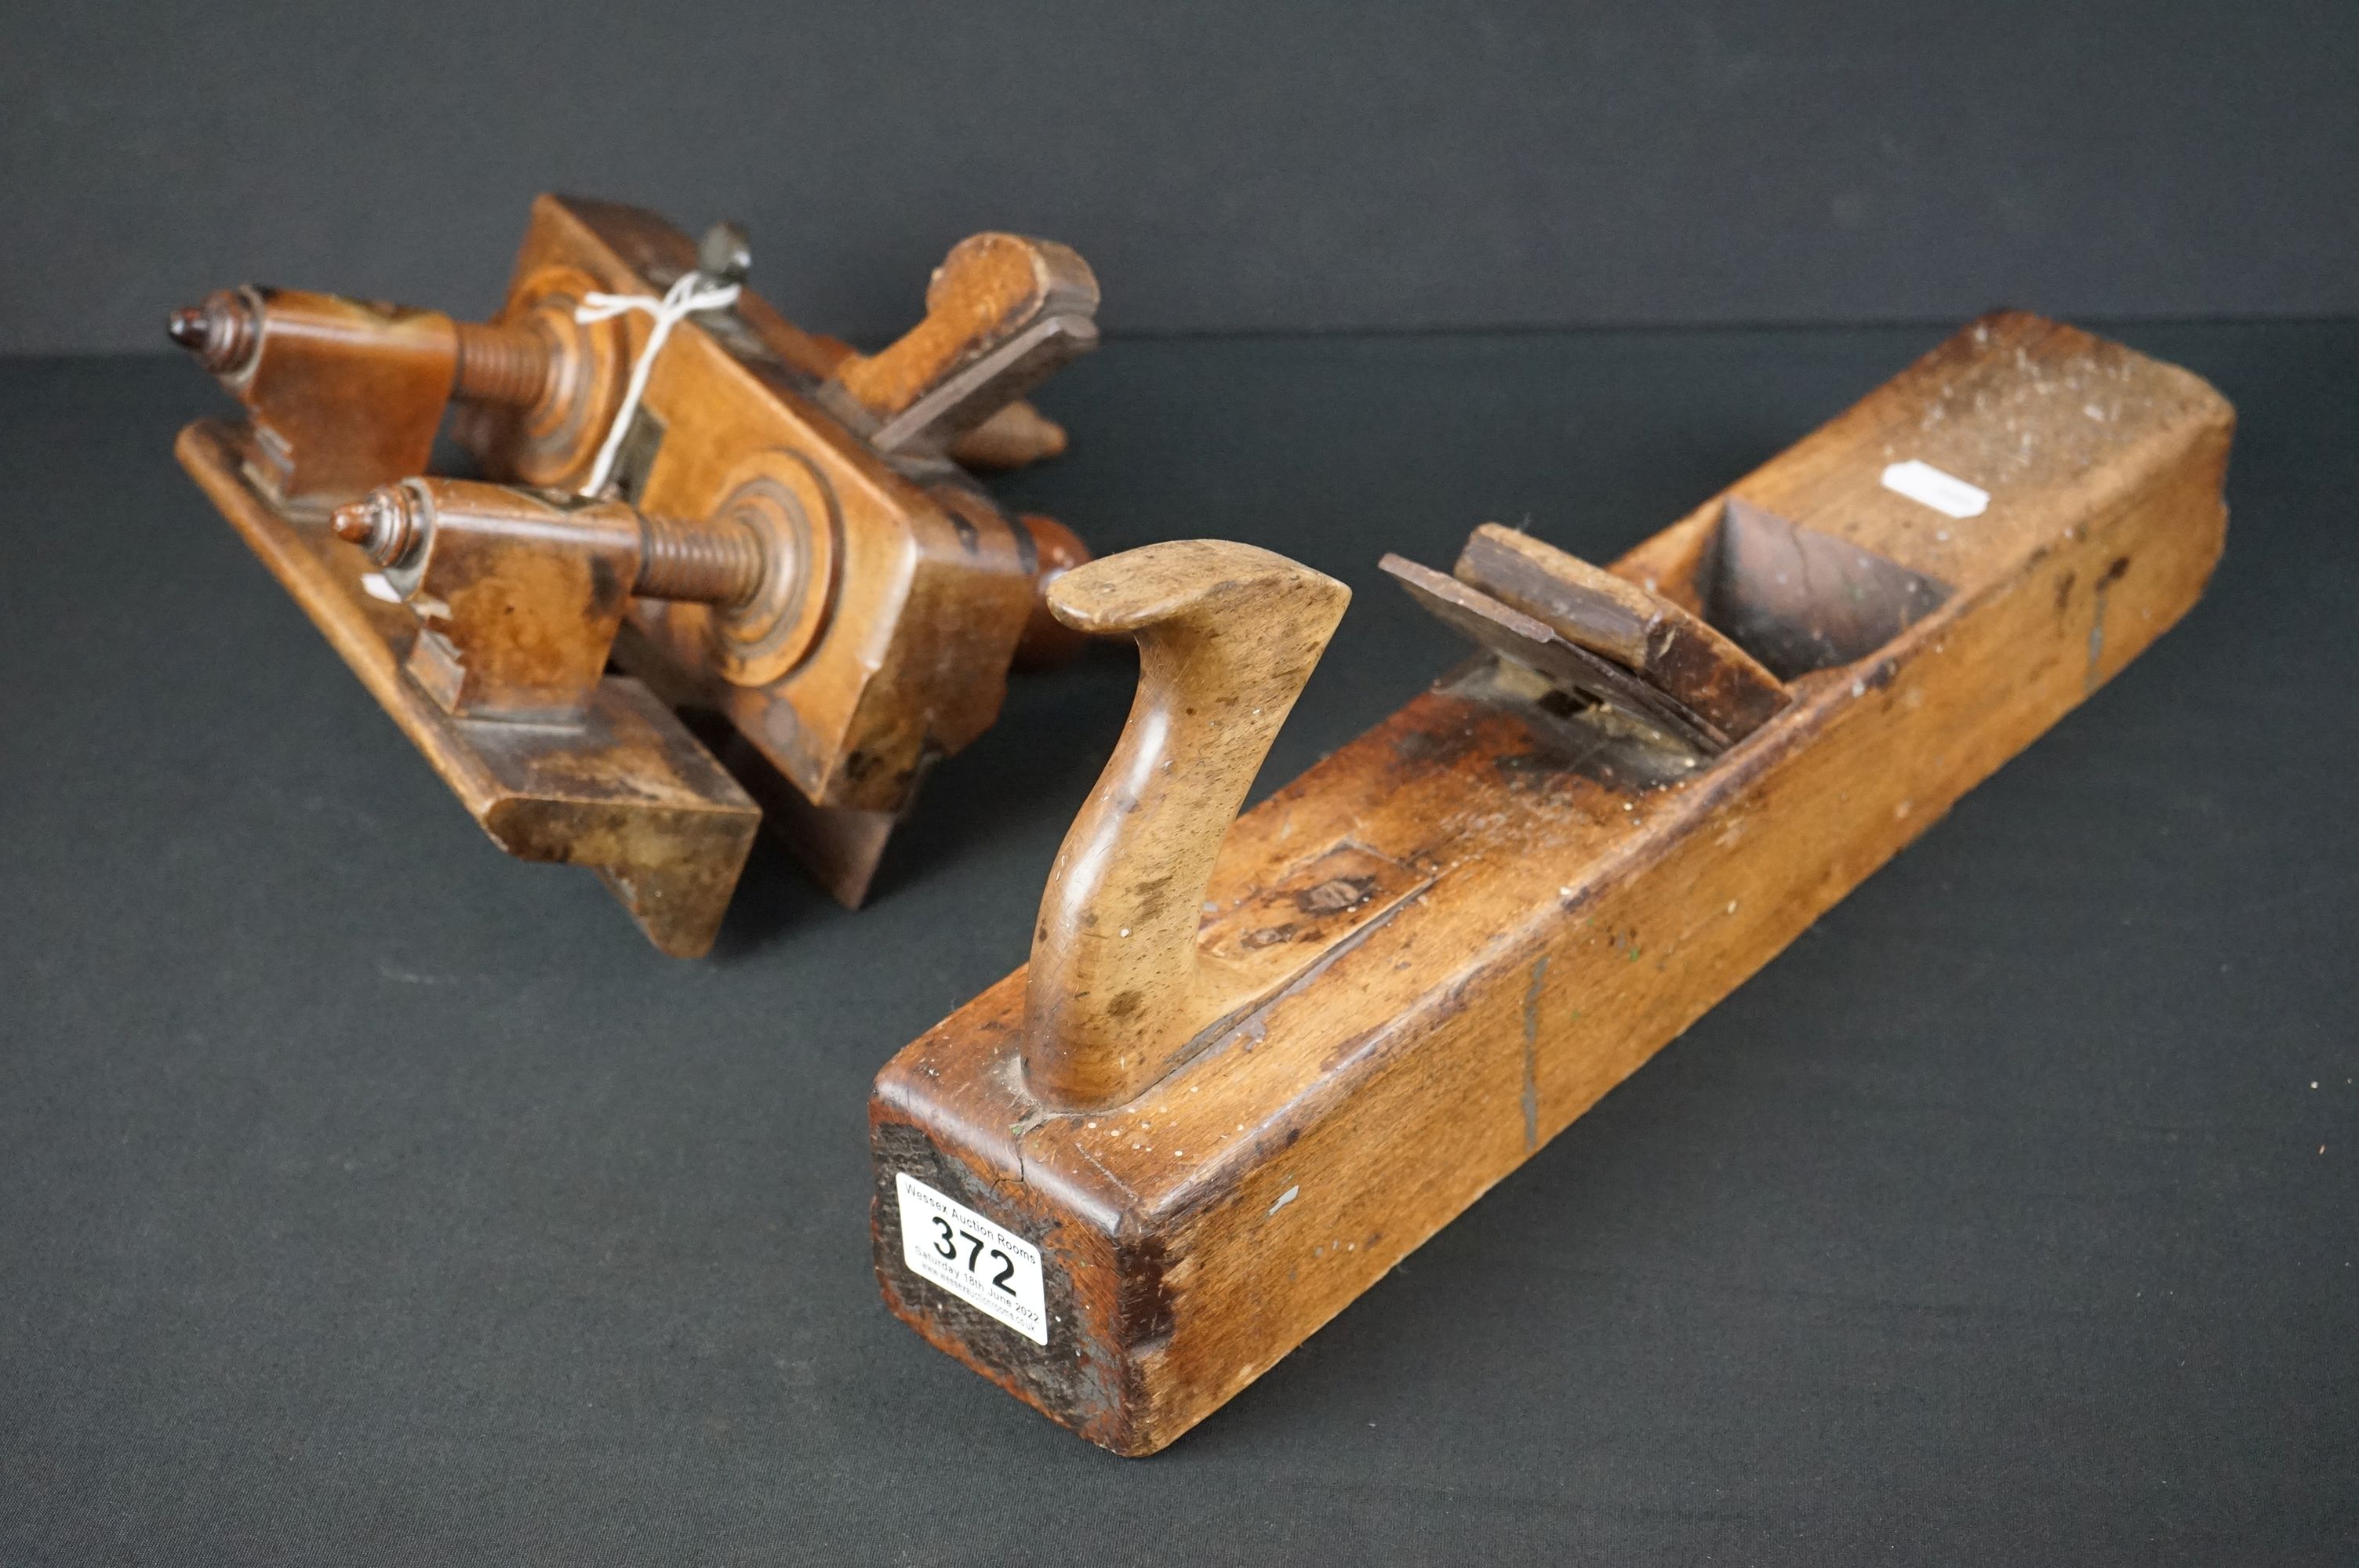 Late 19th century Wooden Sash Fillister Plane by Varville and Sons of York together with a 16" Beech